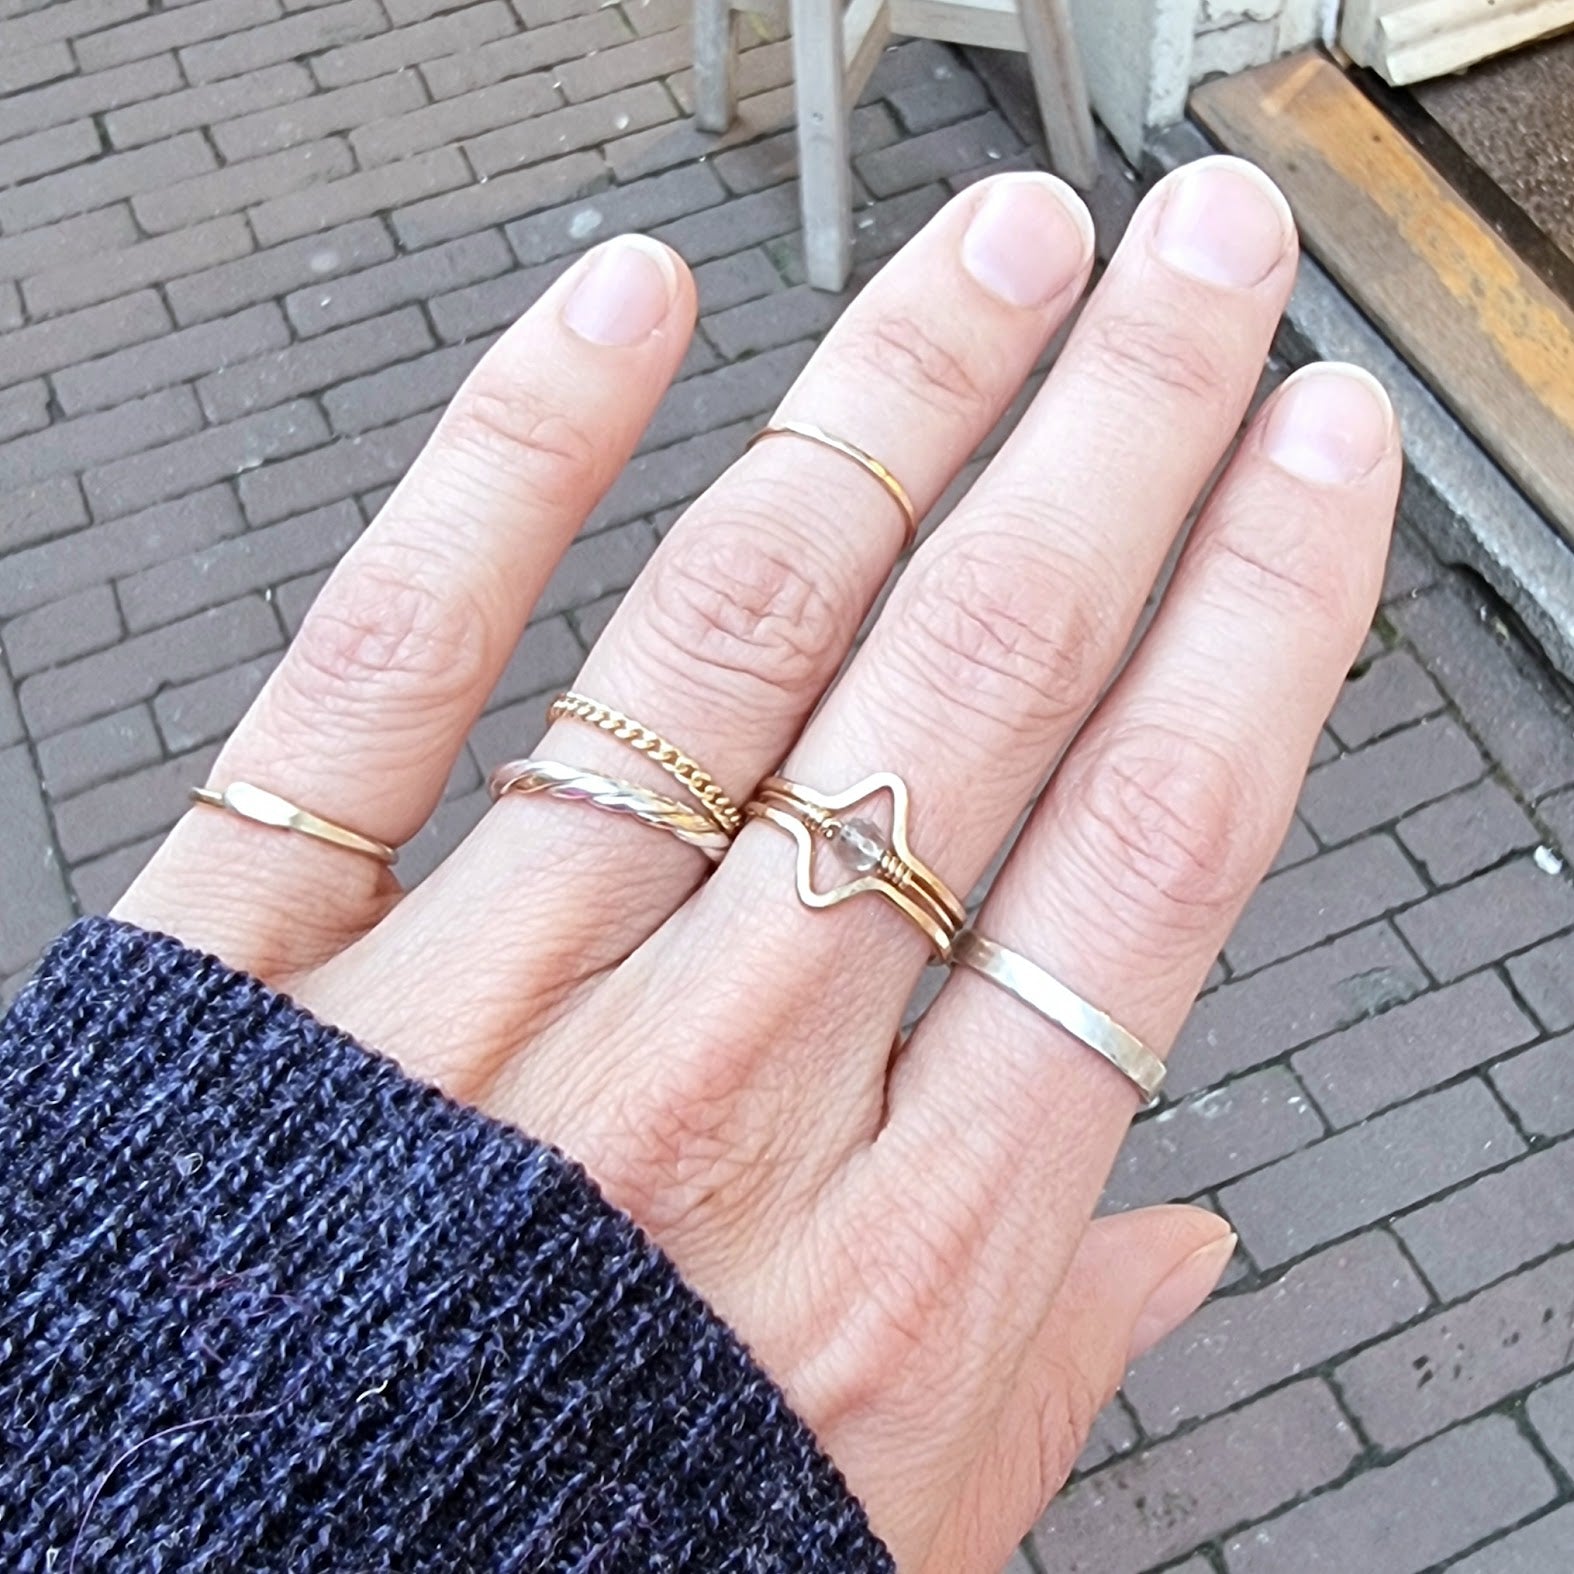 ringstack on hand with hug ring, plain jane 1.0 chain ring and multiple wave rings